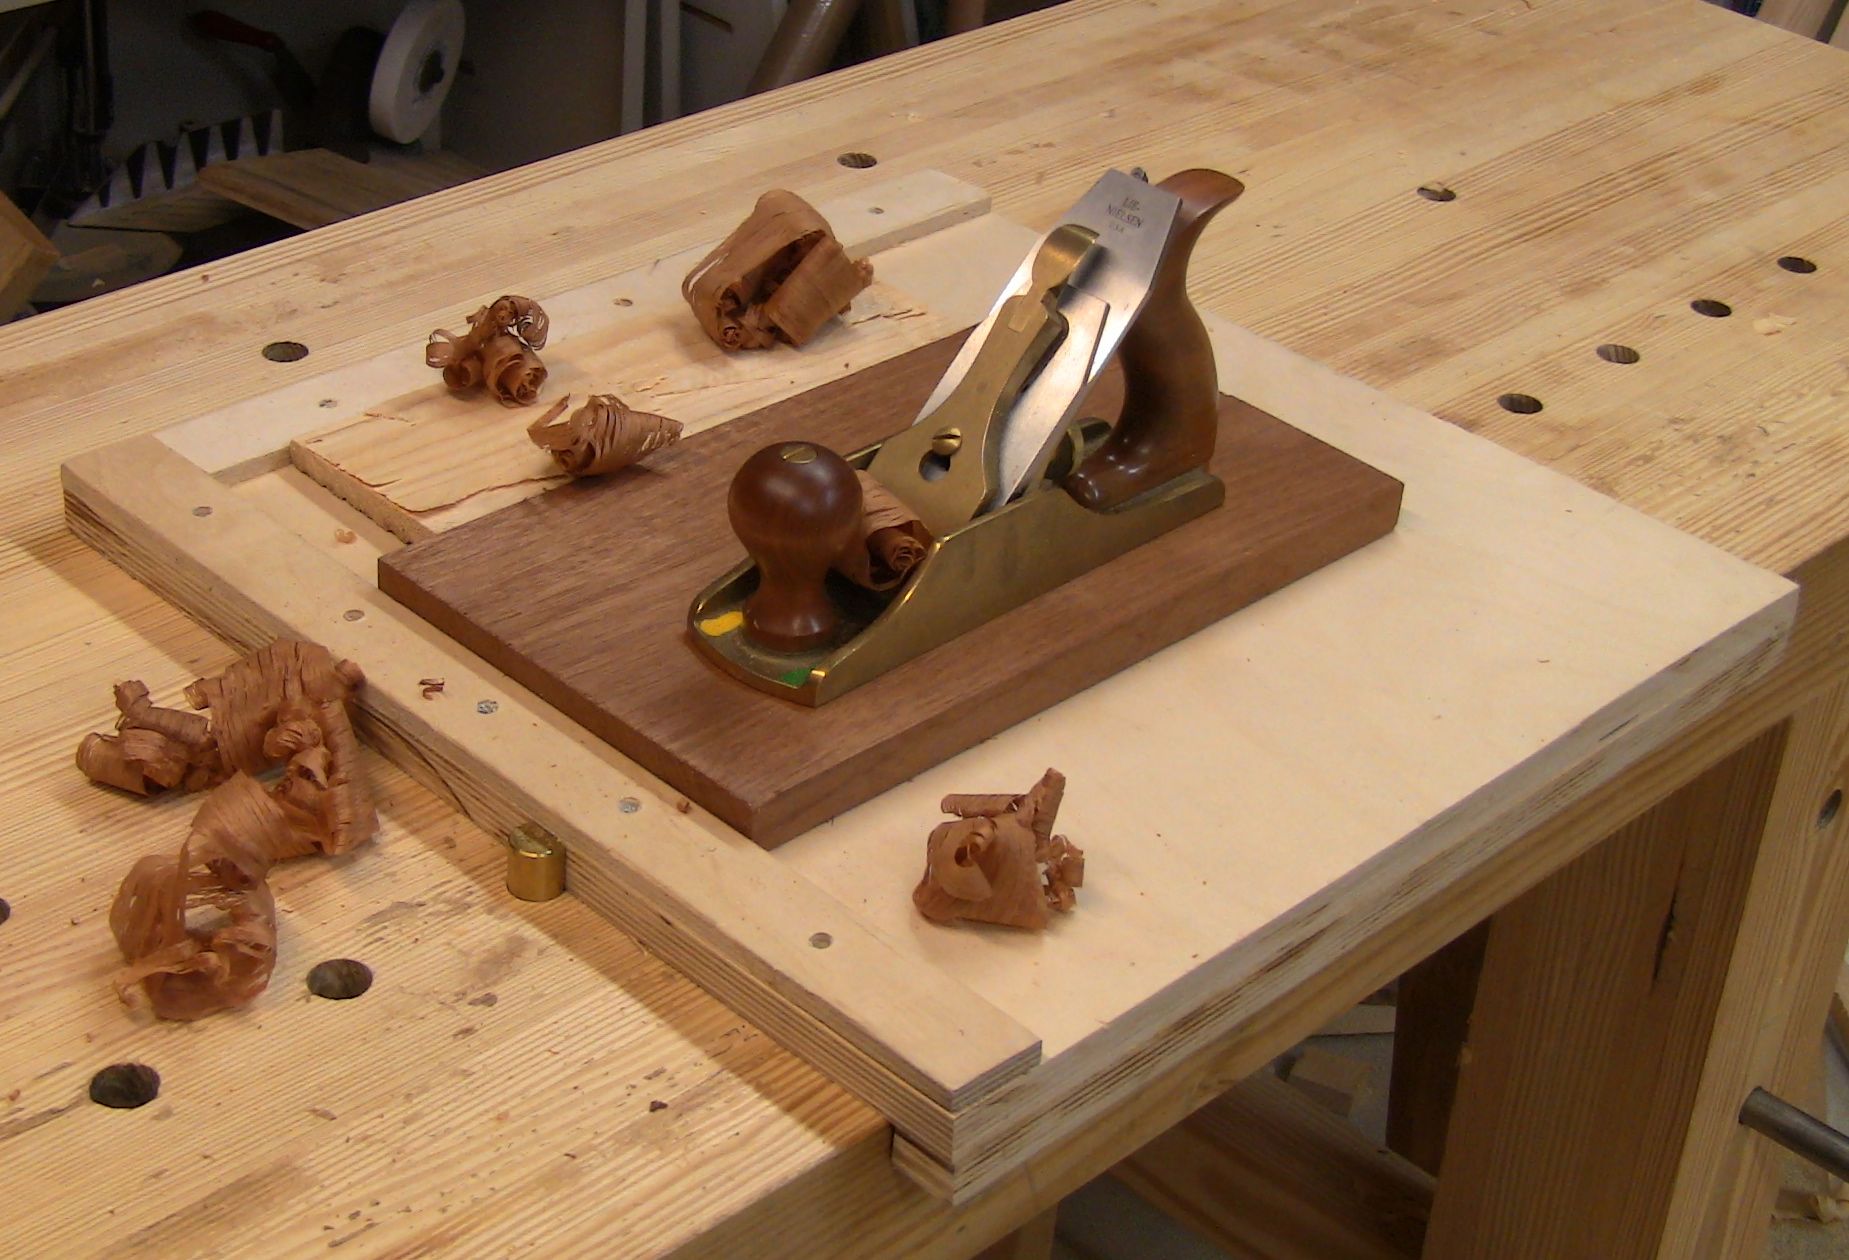 Beyond The Vise: Planing Boards